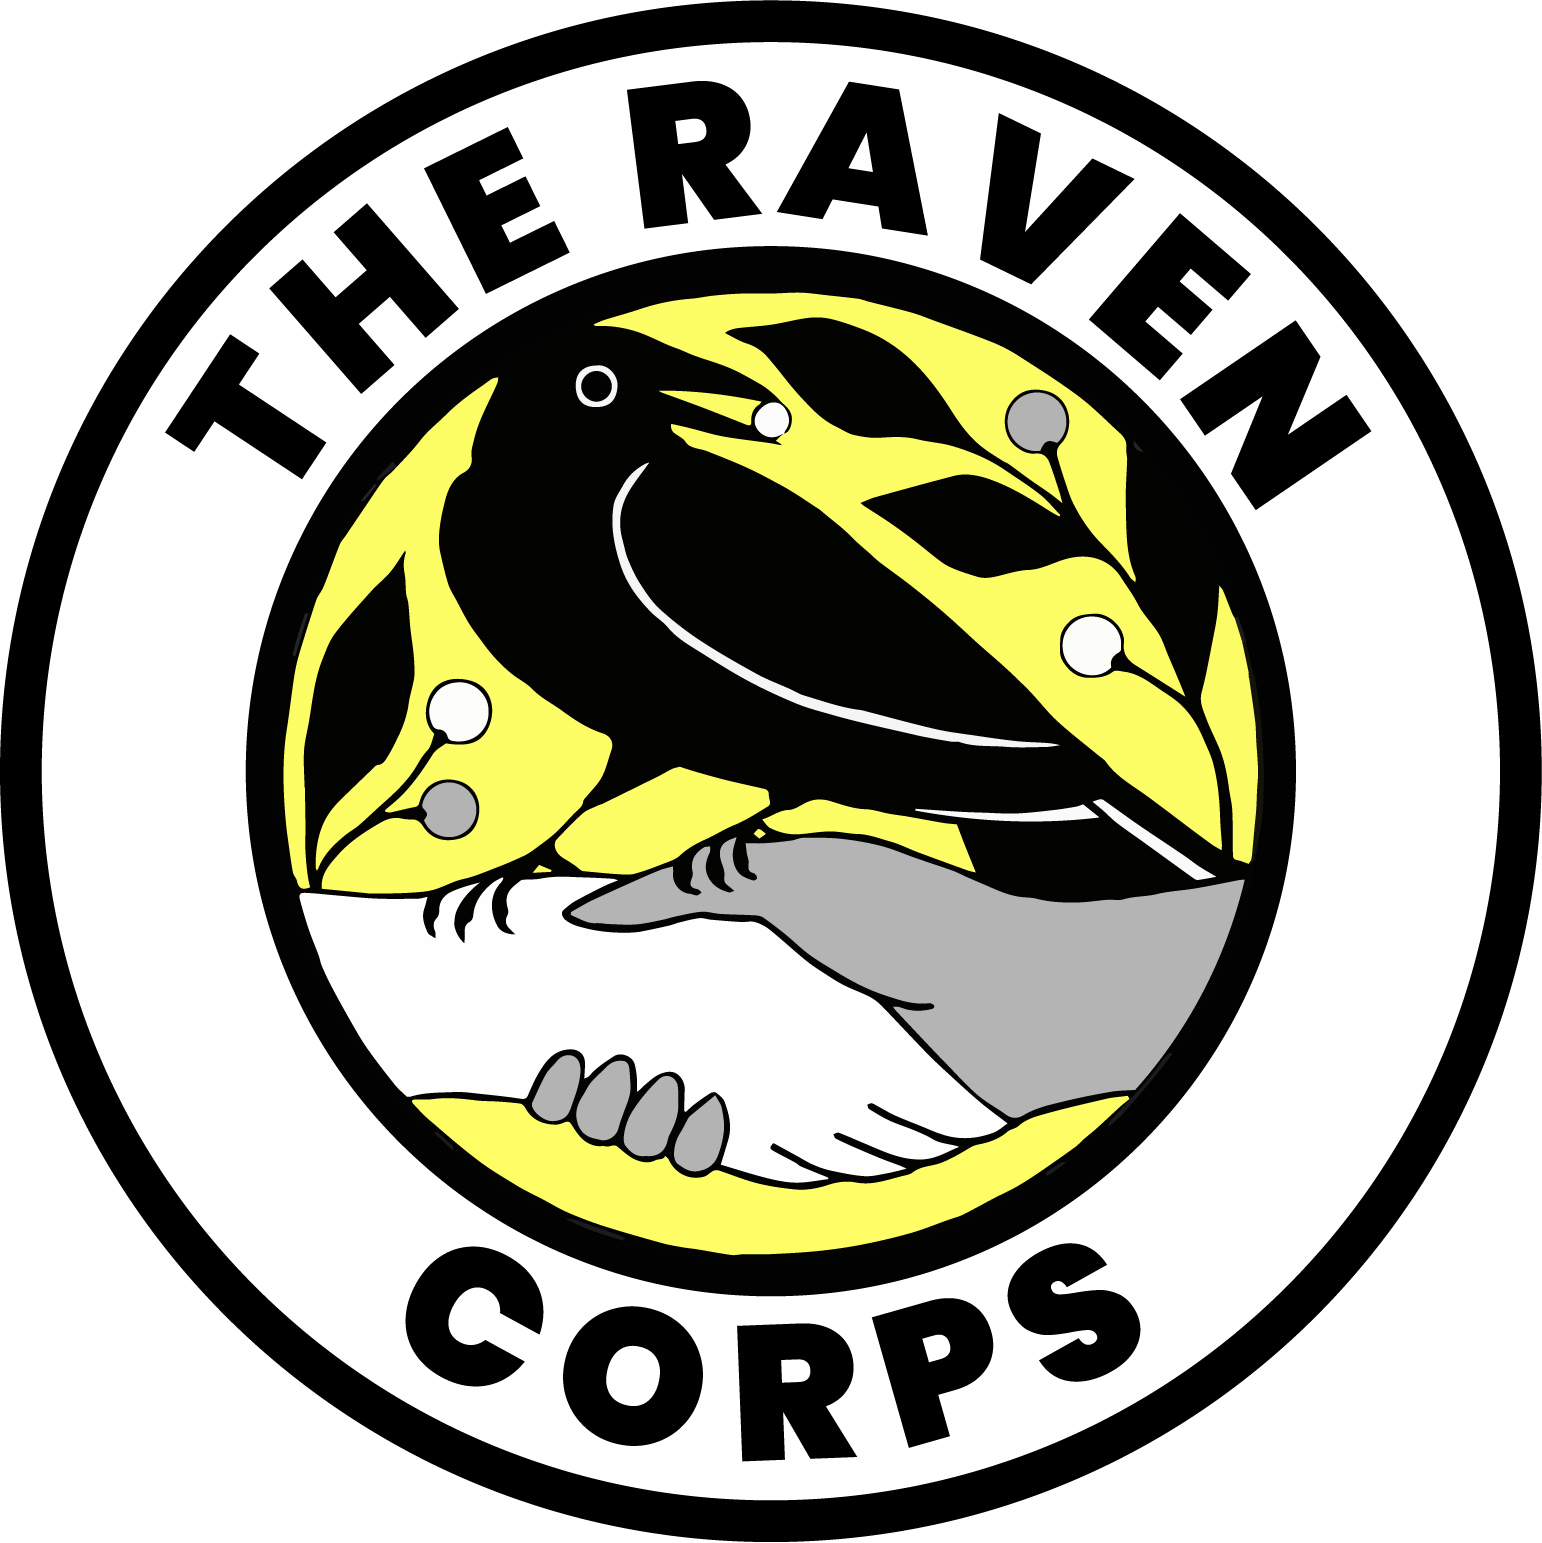 The Raven Corps logo